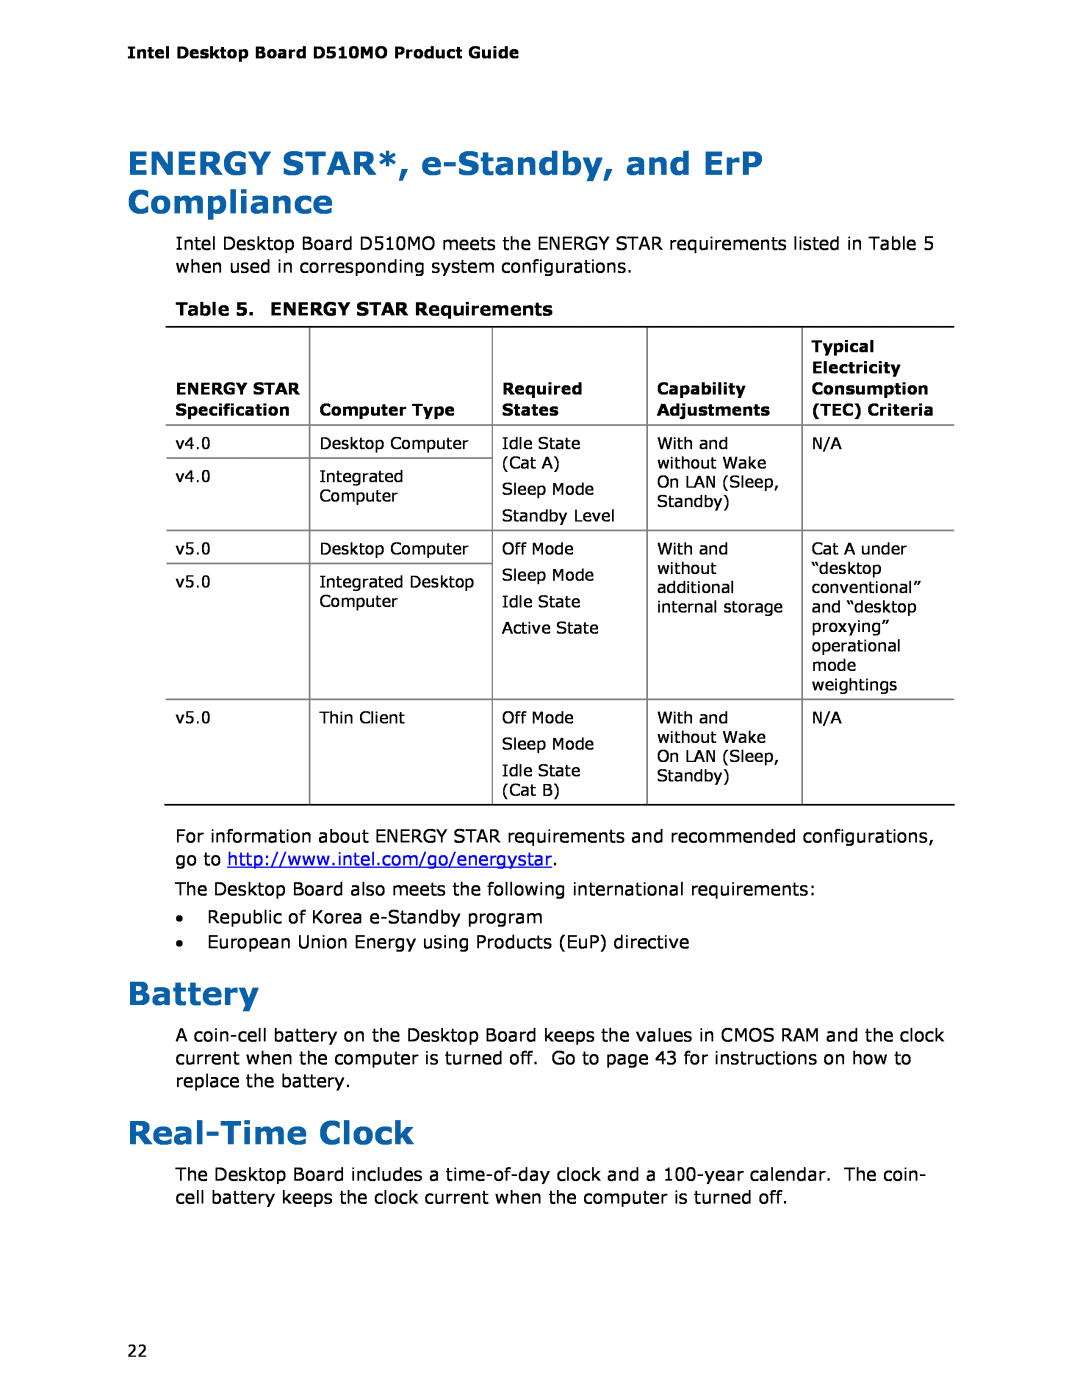 Intel D510MO manual ENERGY STAR*, e-Standby, and ErP Compliance, Battery, Real-Time Clock, ENERGY STAR Requirements 